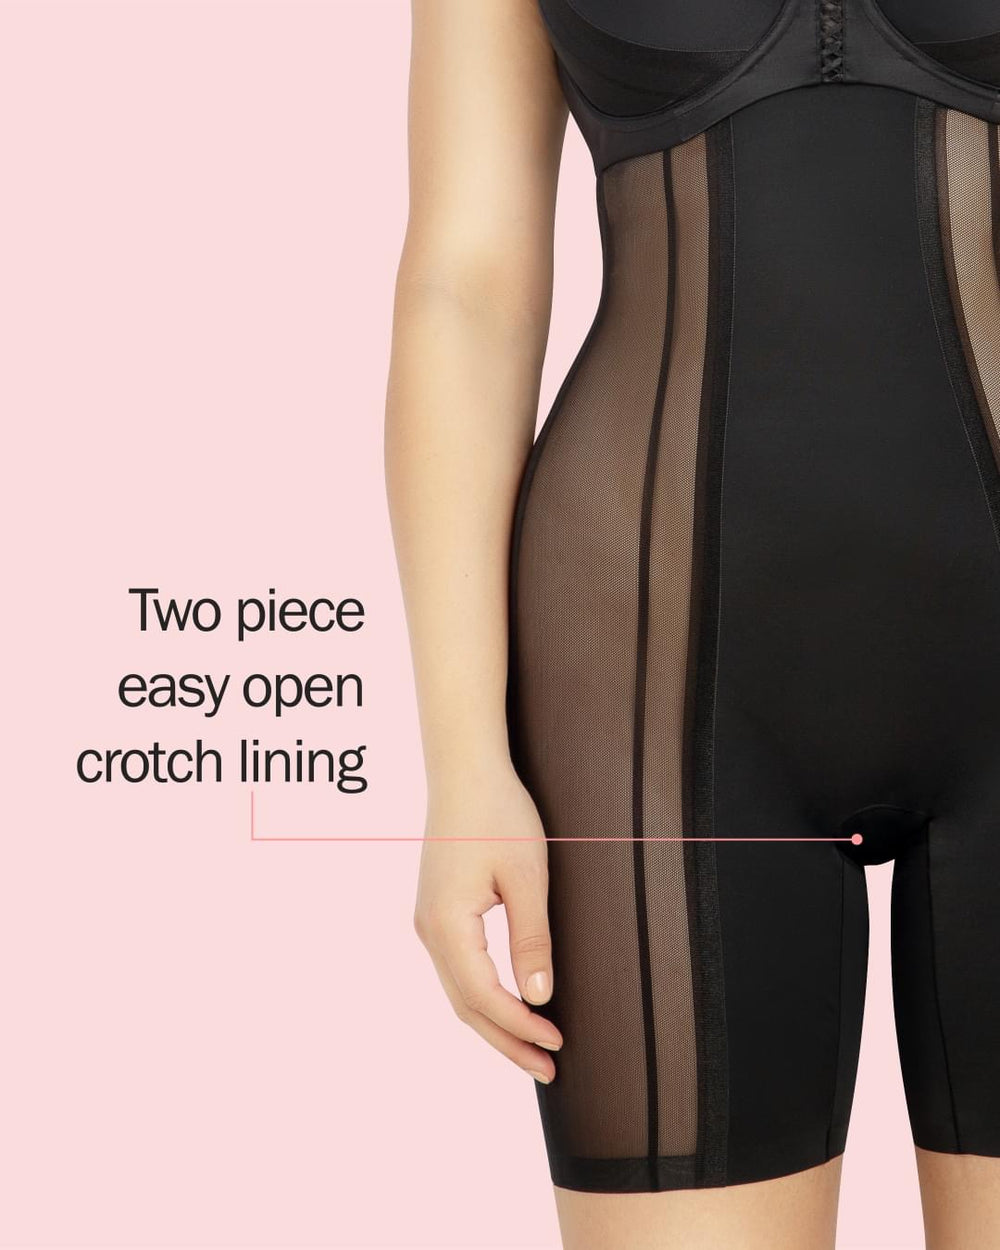 Herrnalise Women's Shapewear With Bra One-piece Attractive And Thin Body  Underwear Suspenders Abdomen Corset Shapewear Clearance 